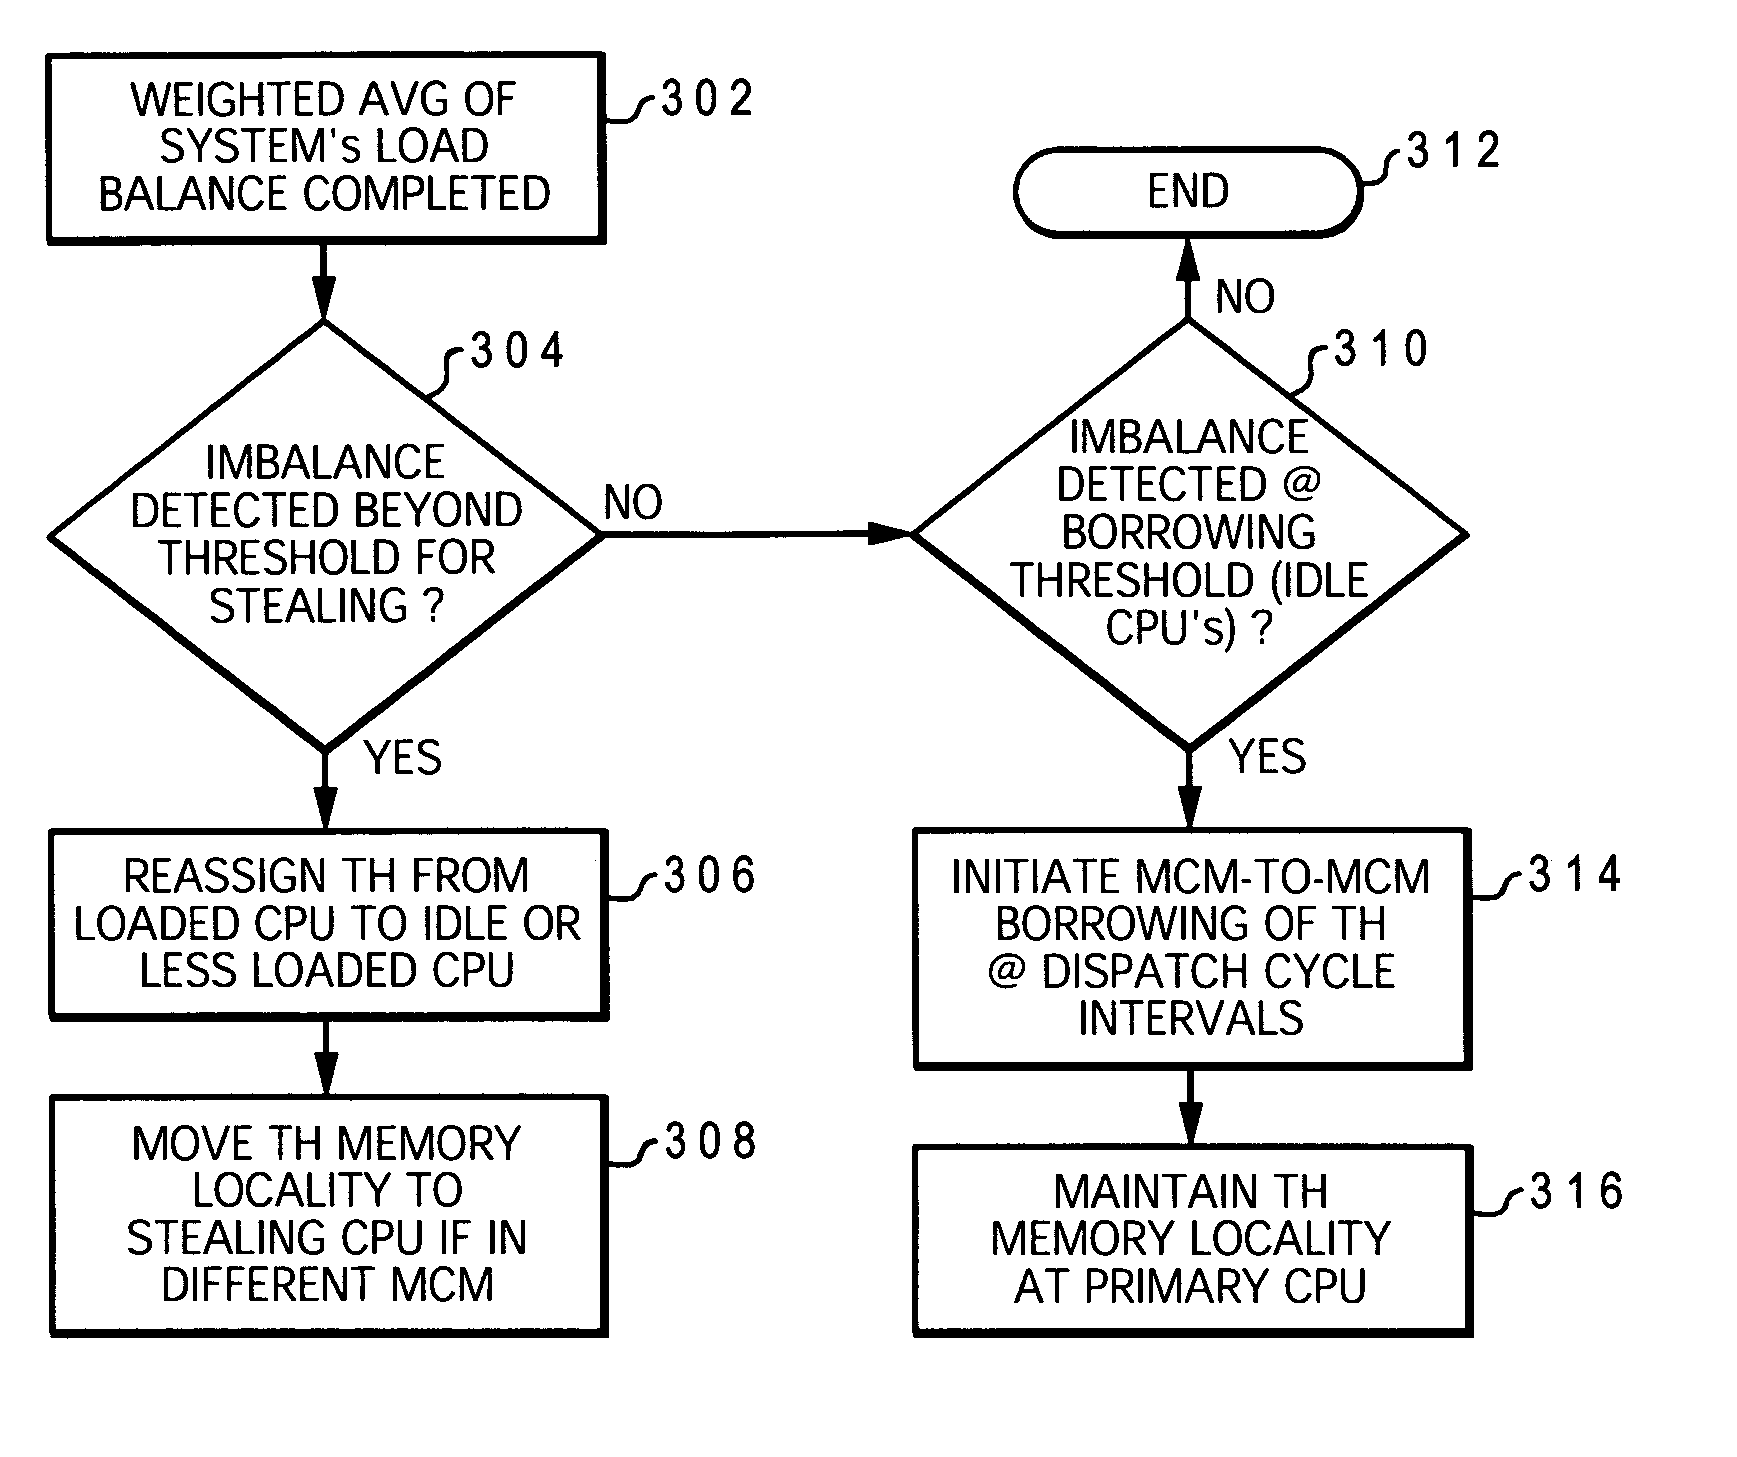 Borrowing threads as a form of load balancing in a multiprocessor data processing system